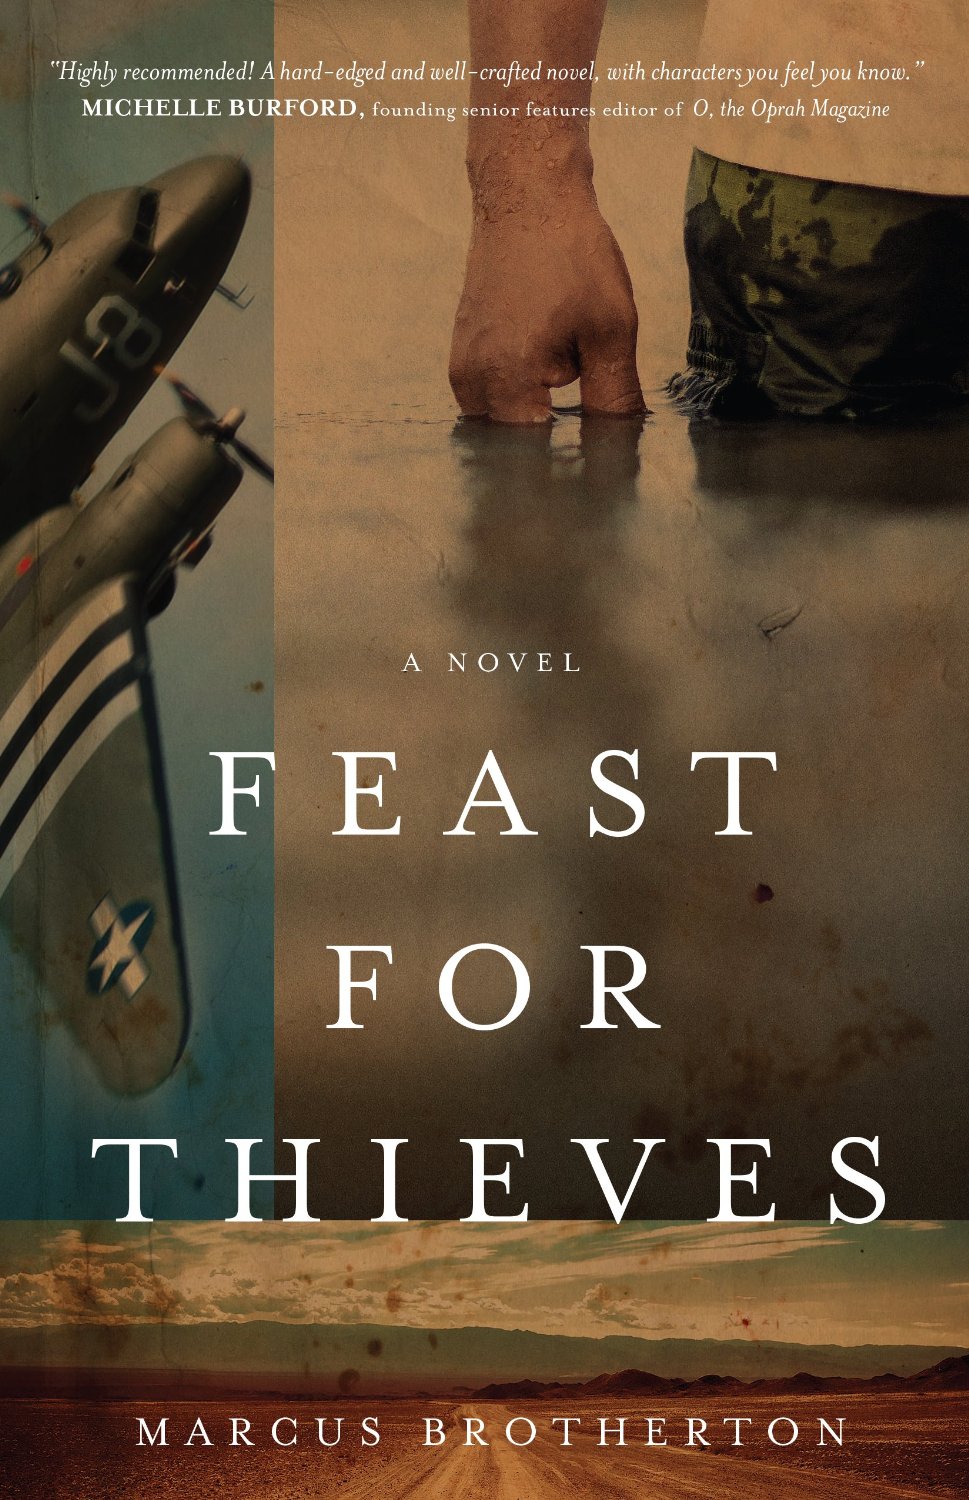 Book Review: Feast for Thieves by Marcus Brotherton